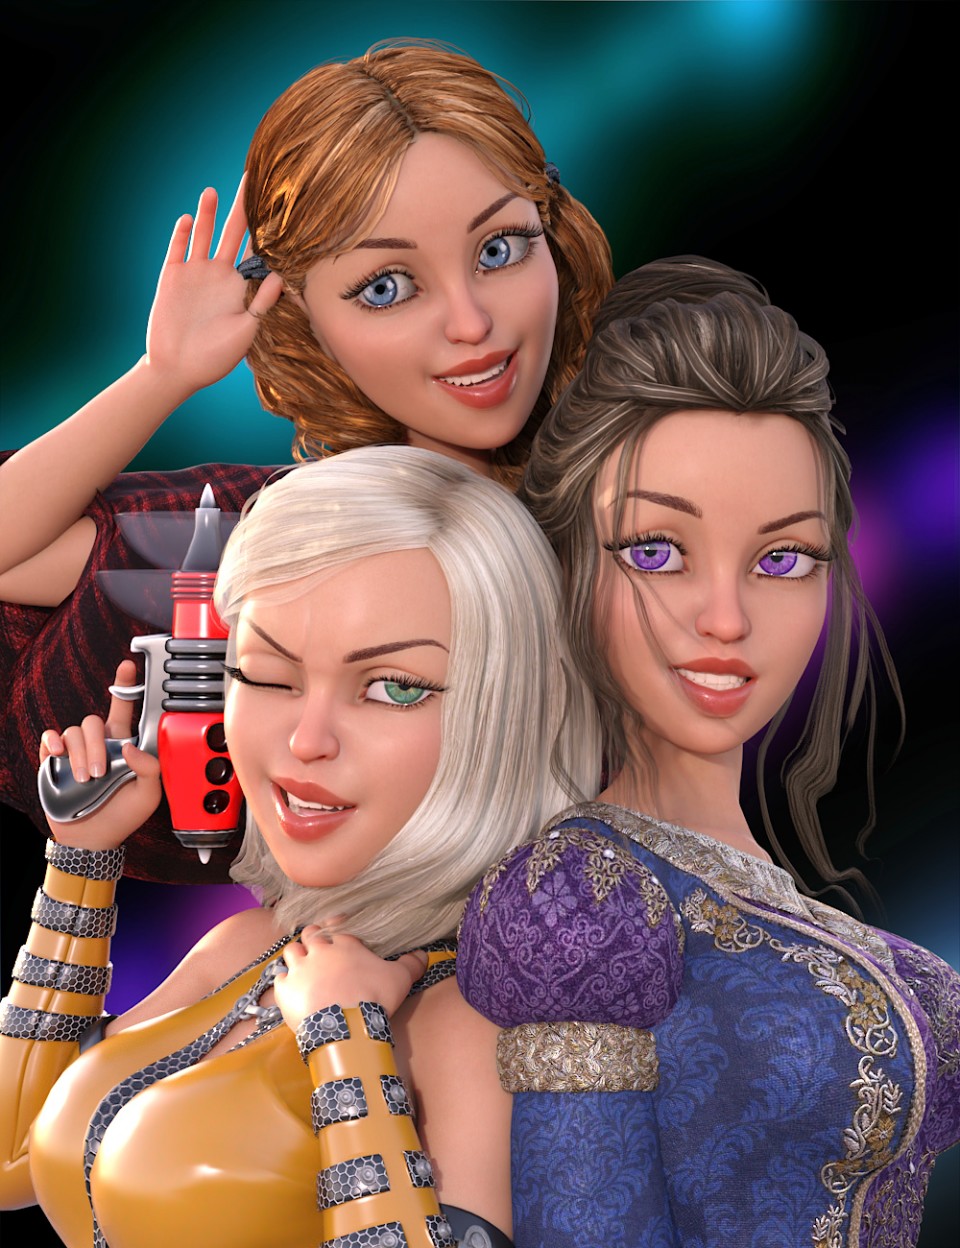 TOON GIRLS Expressions for The Girl 8_DAZ3DDL